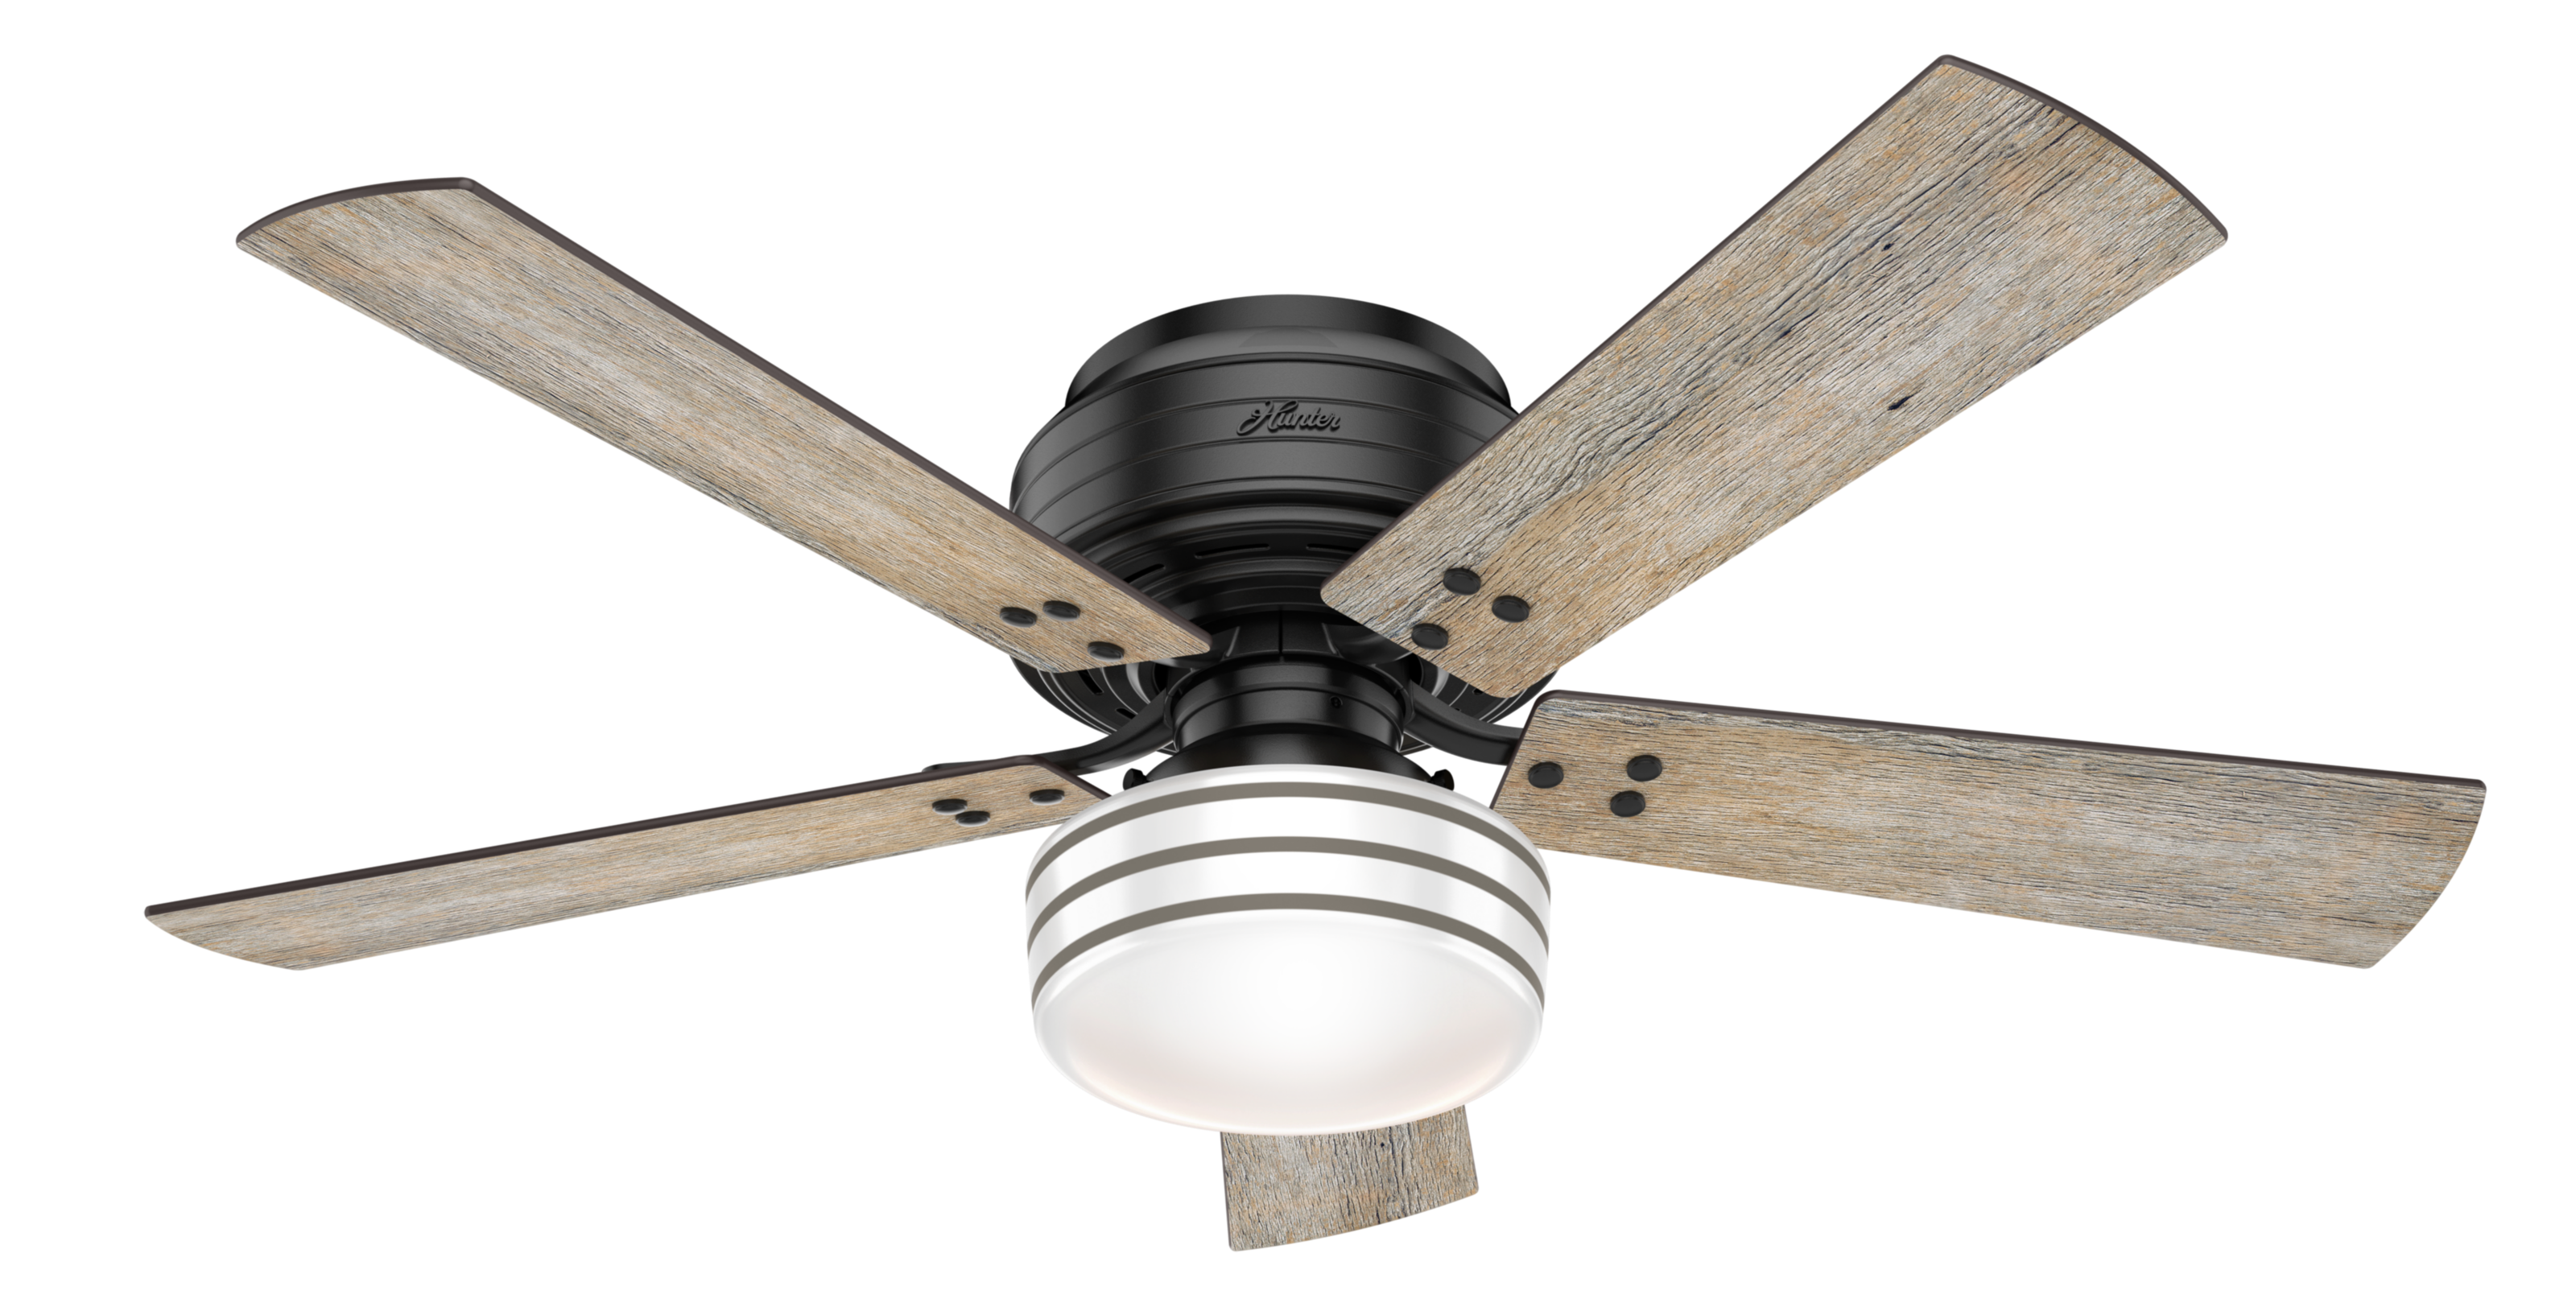 Hunter 52 inch Cedar Key Low Profile Damp Rated Ceiling Fan with LED Light Kit and Handheld Remote Ceiling Fan Hunter   